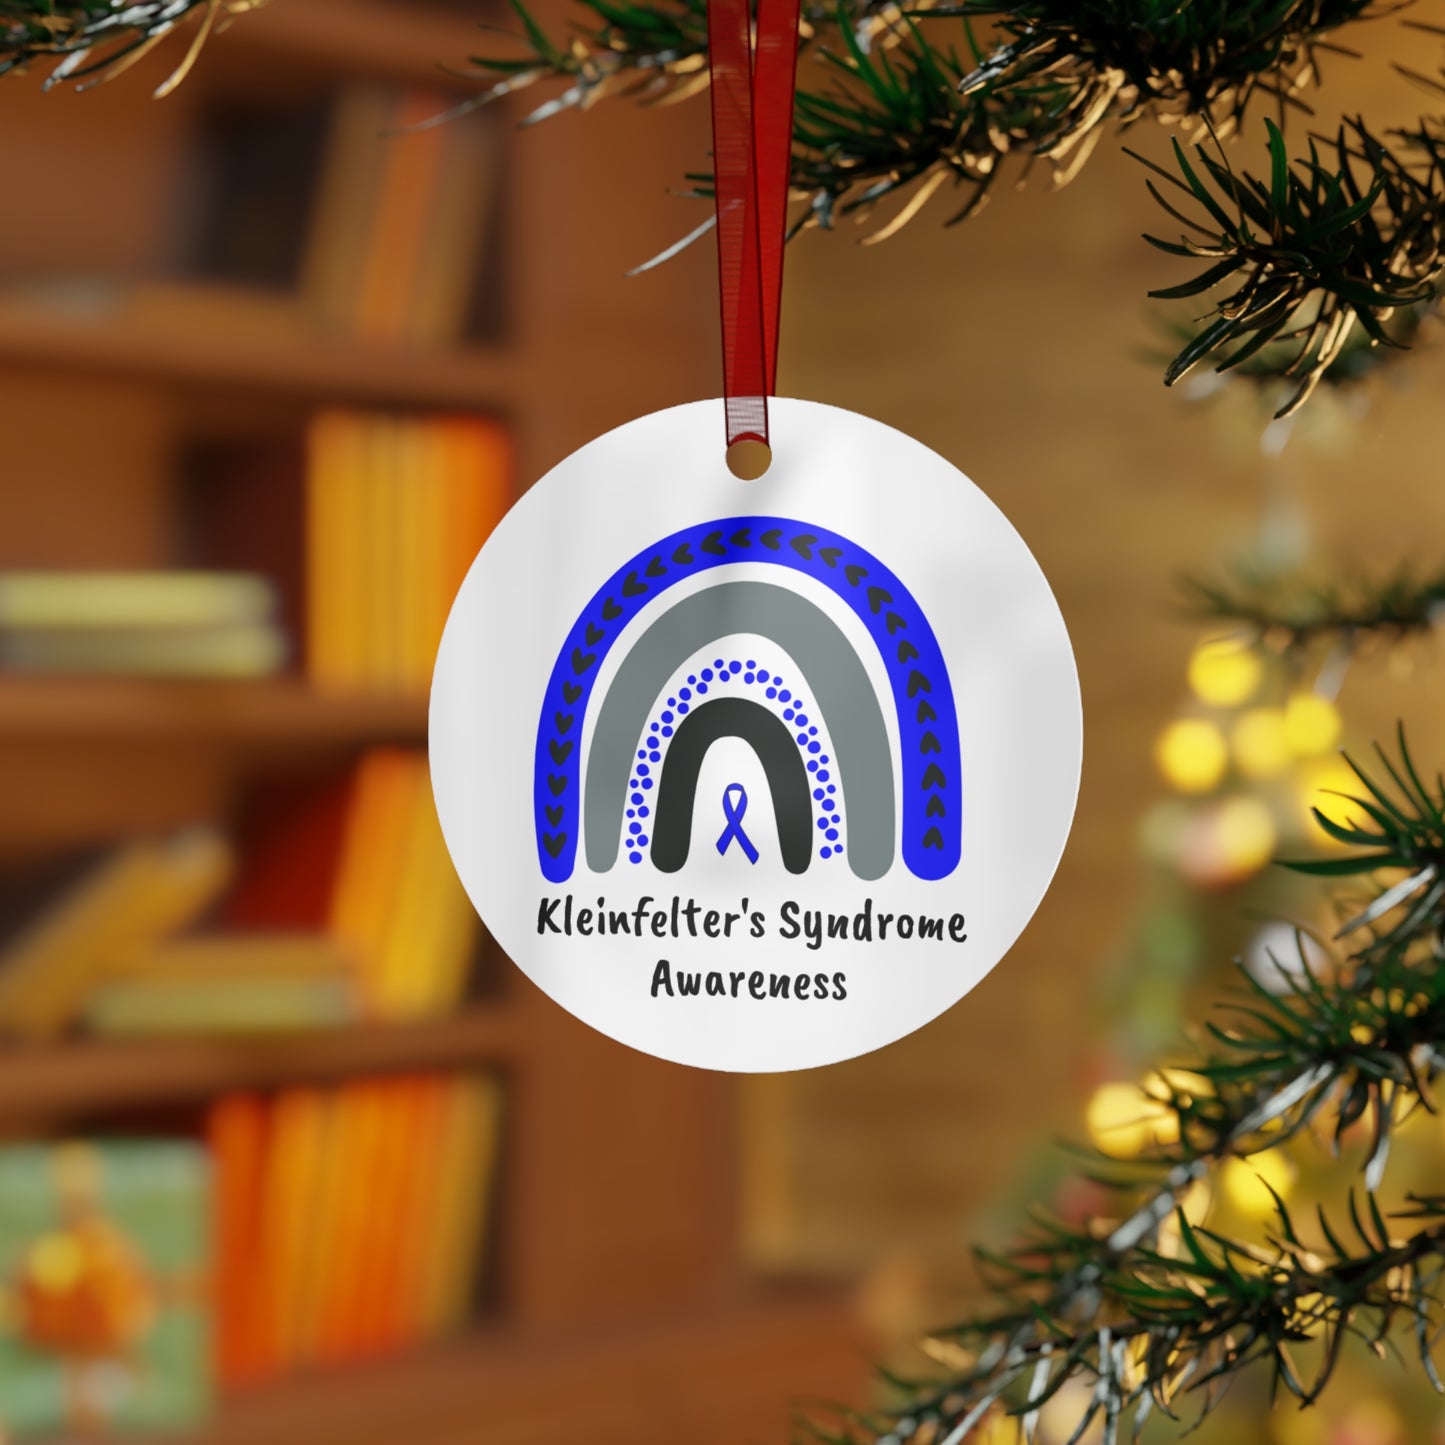 Kleinfelter's Syndrome Awareness Christmas Ornament Stocking Stuffer Christmas Gift, Holiday Home Decor, Wall Hanging, Support